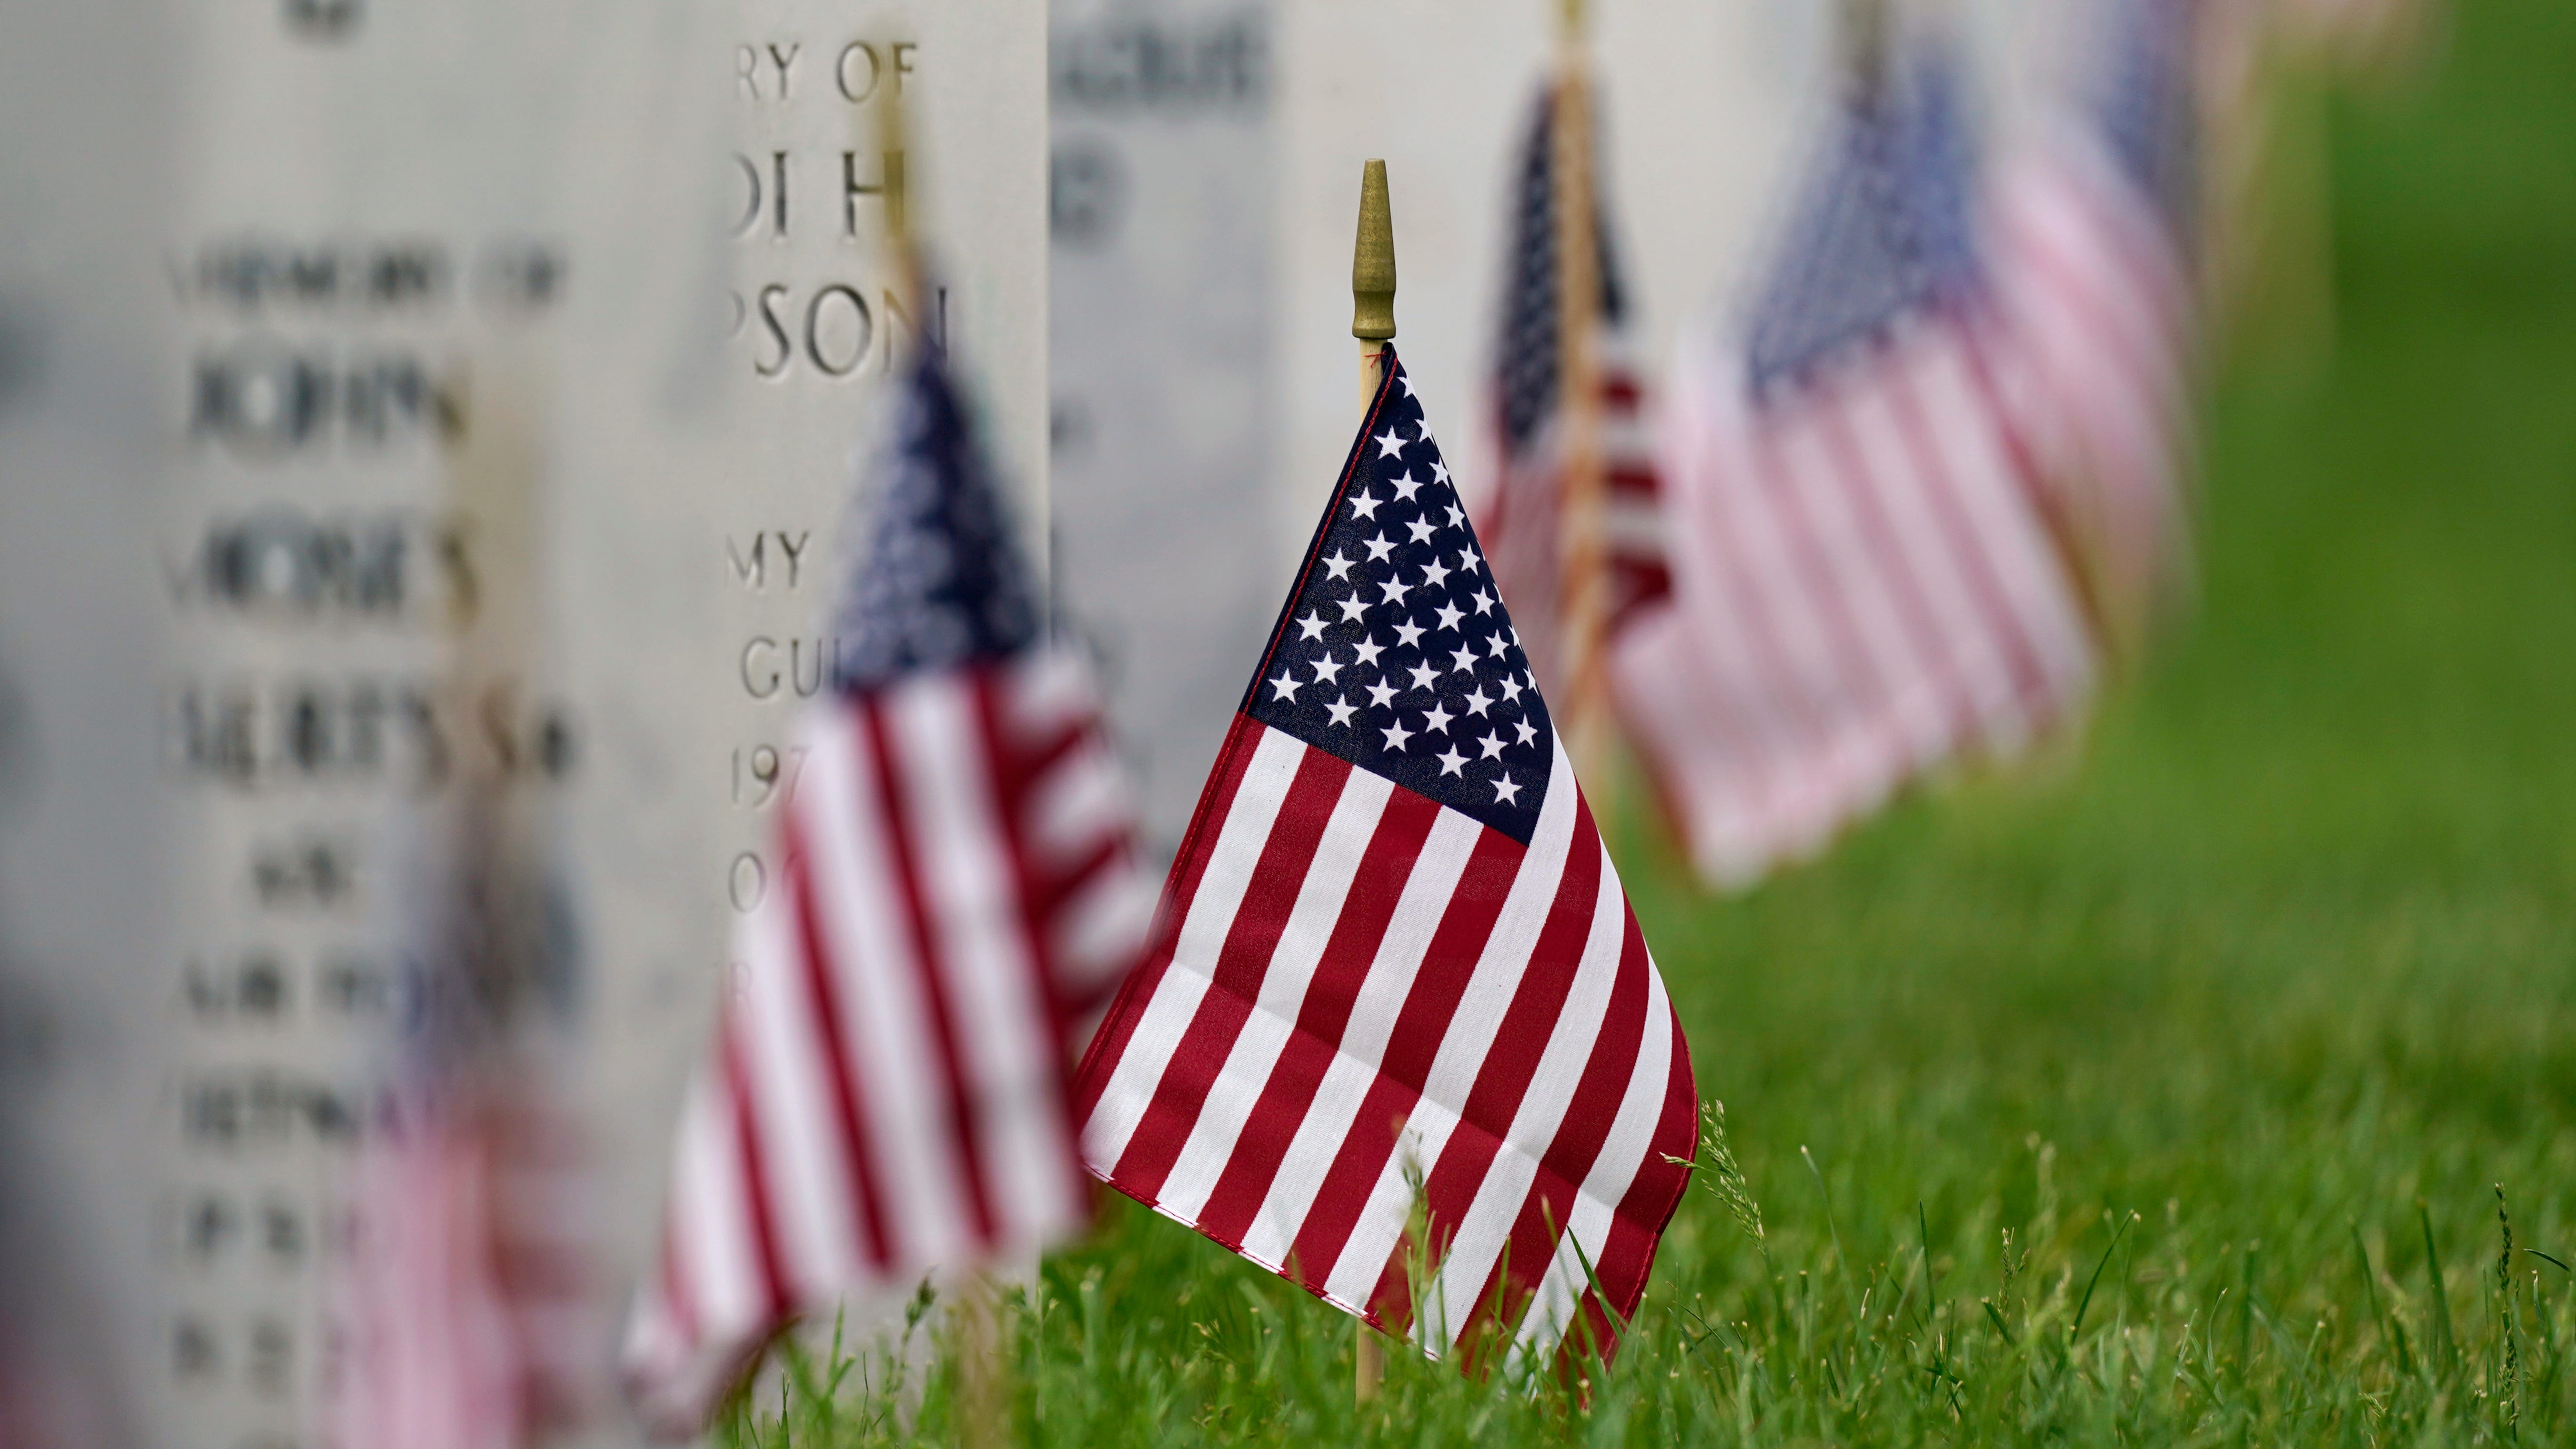 Flags mark gravestones at Fort Logan National Cemetery in Denver on May 31, 2021. The number of U.S. military suicides jumped by 15% last year, fueled by significant increases in the Army and Marine Corps that senior leaders called troubling.